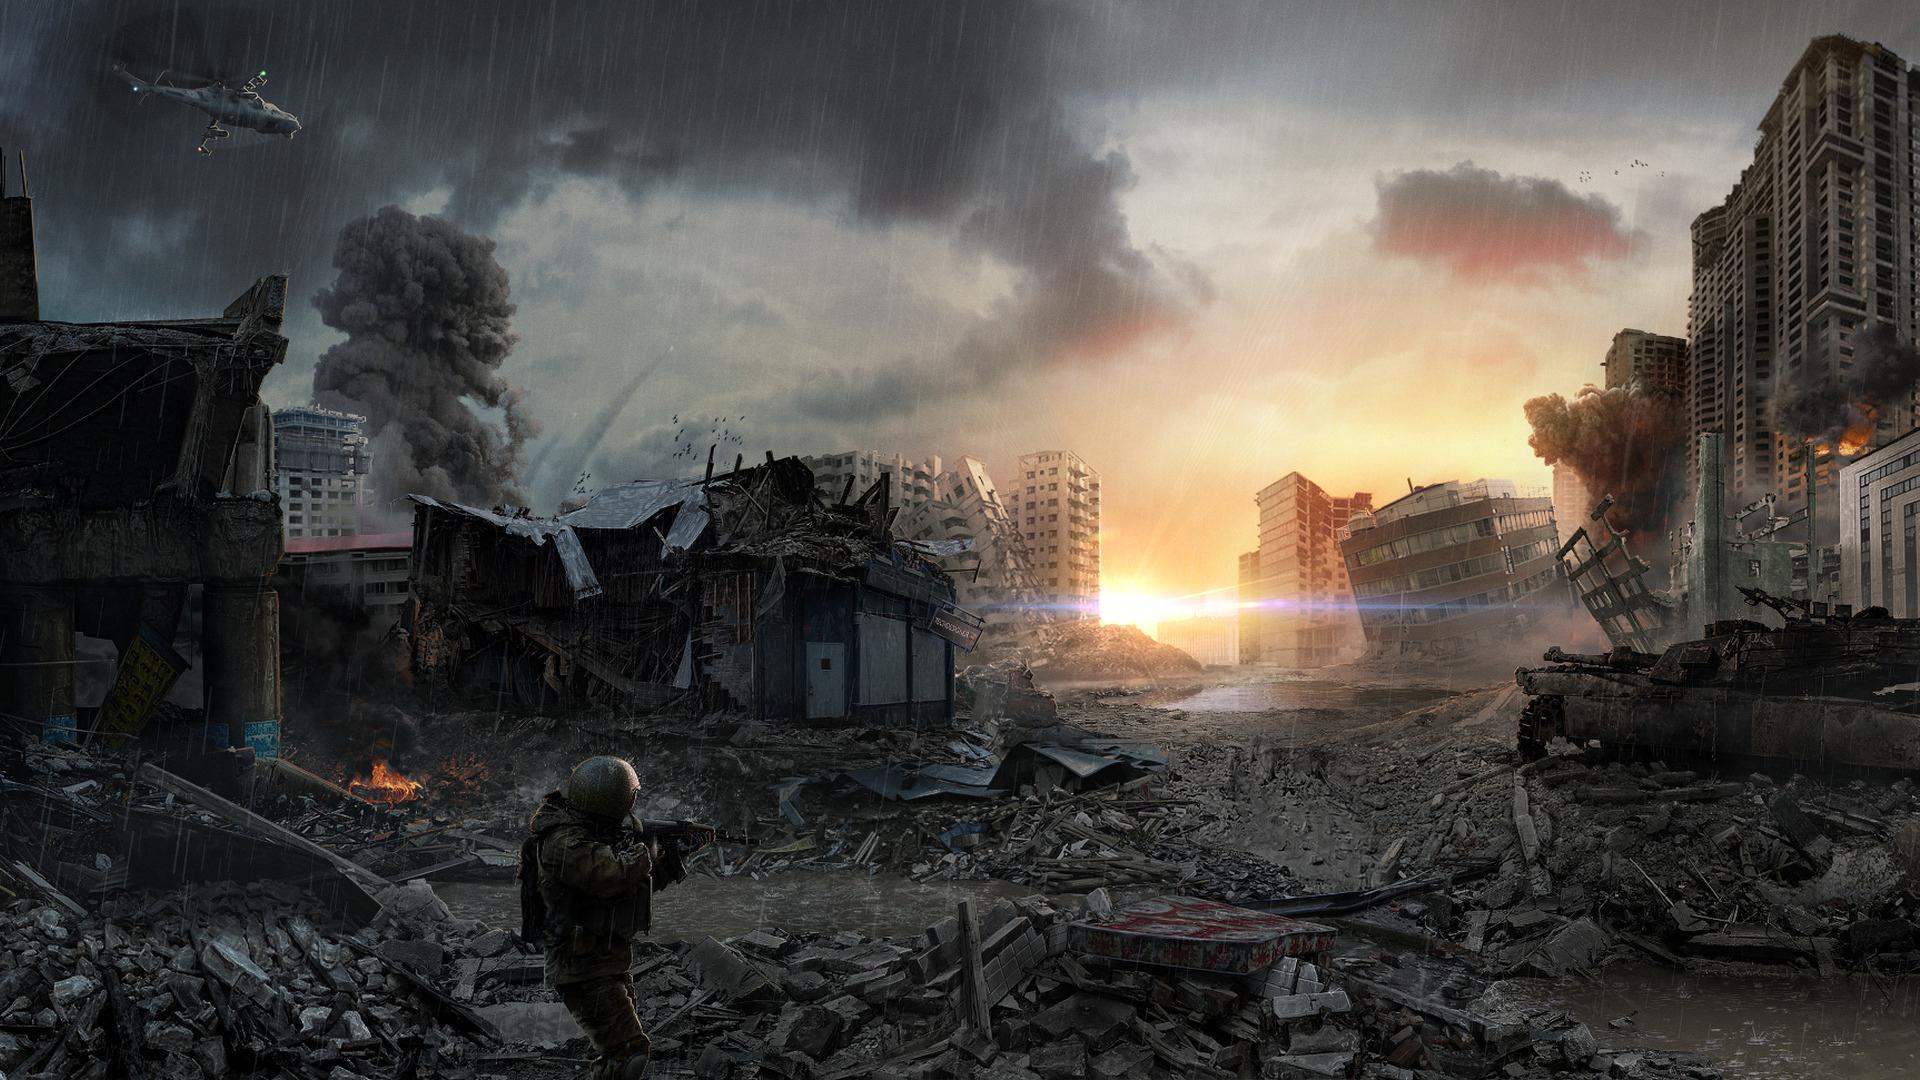 Wallpaper For > Post Apocalyptic Wallpaper 1920x1200